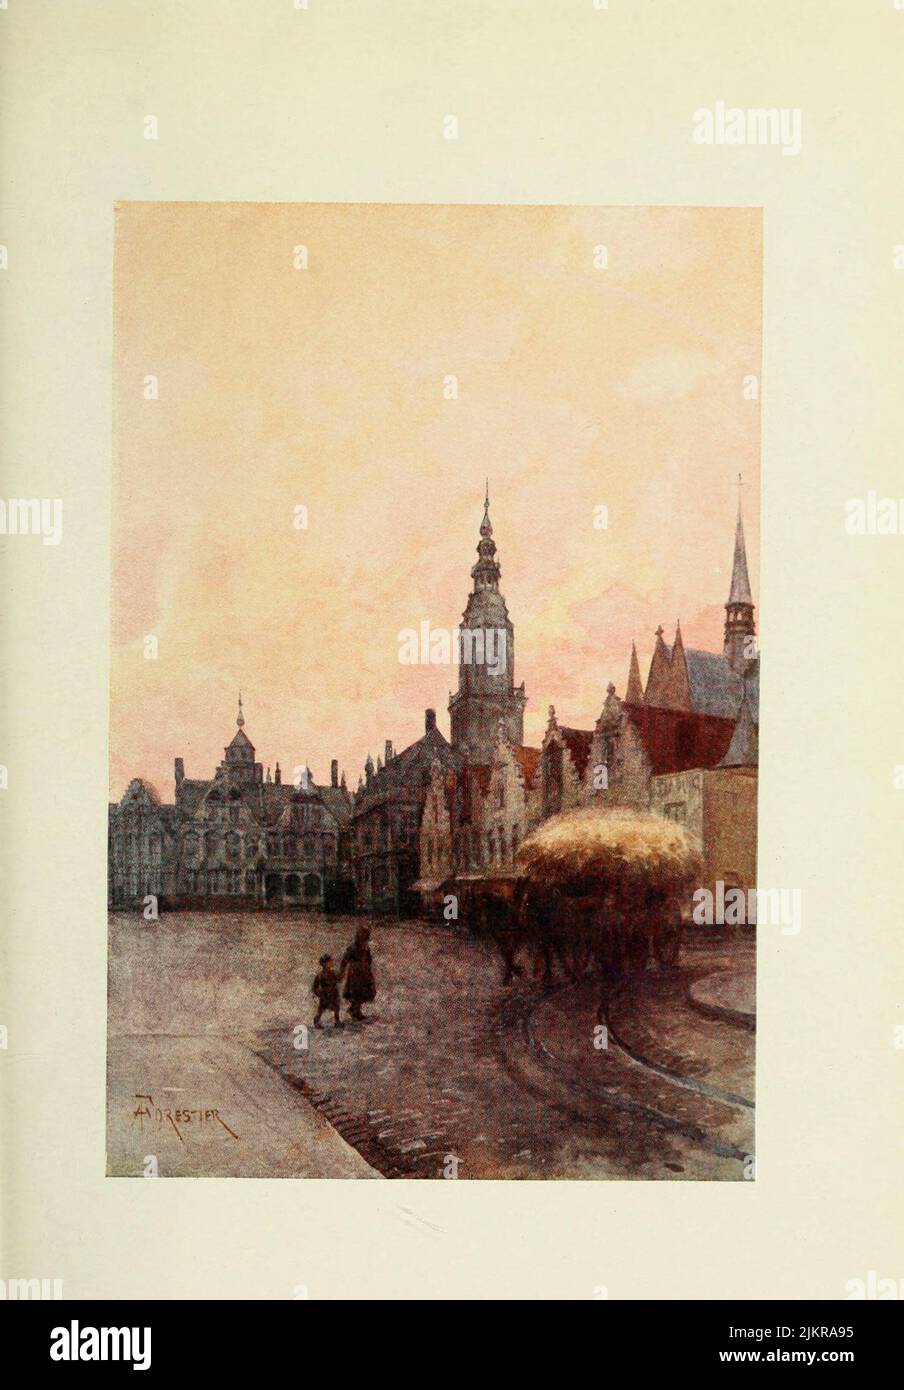 Furnes : Grand' Place and Belfry Painted by Amedee Forestier, from the book '  Bruges and West Flanders ' by George William Thomson Omond, Publication date 1906 Publisher London : A. & C. Black Sir Amédée Forestier (Paris 1854 – 18 November 1930 London) was an Anglo-French artist and illustrator who specialised in historical and prehistoric scenes, and landscapes. Stock Photo